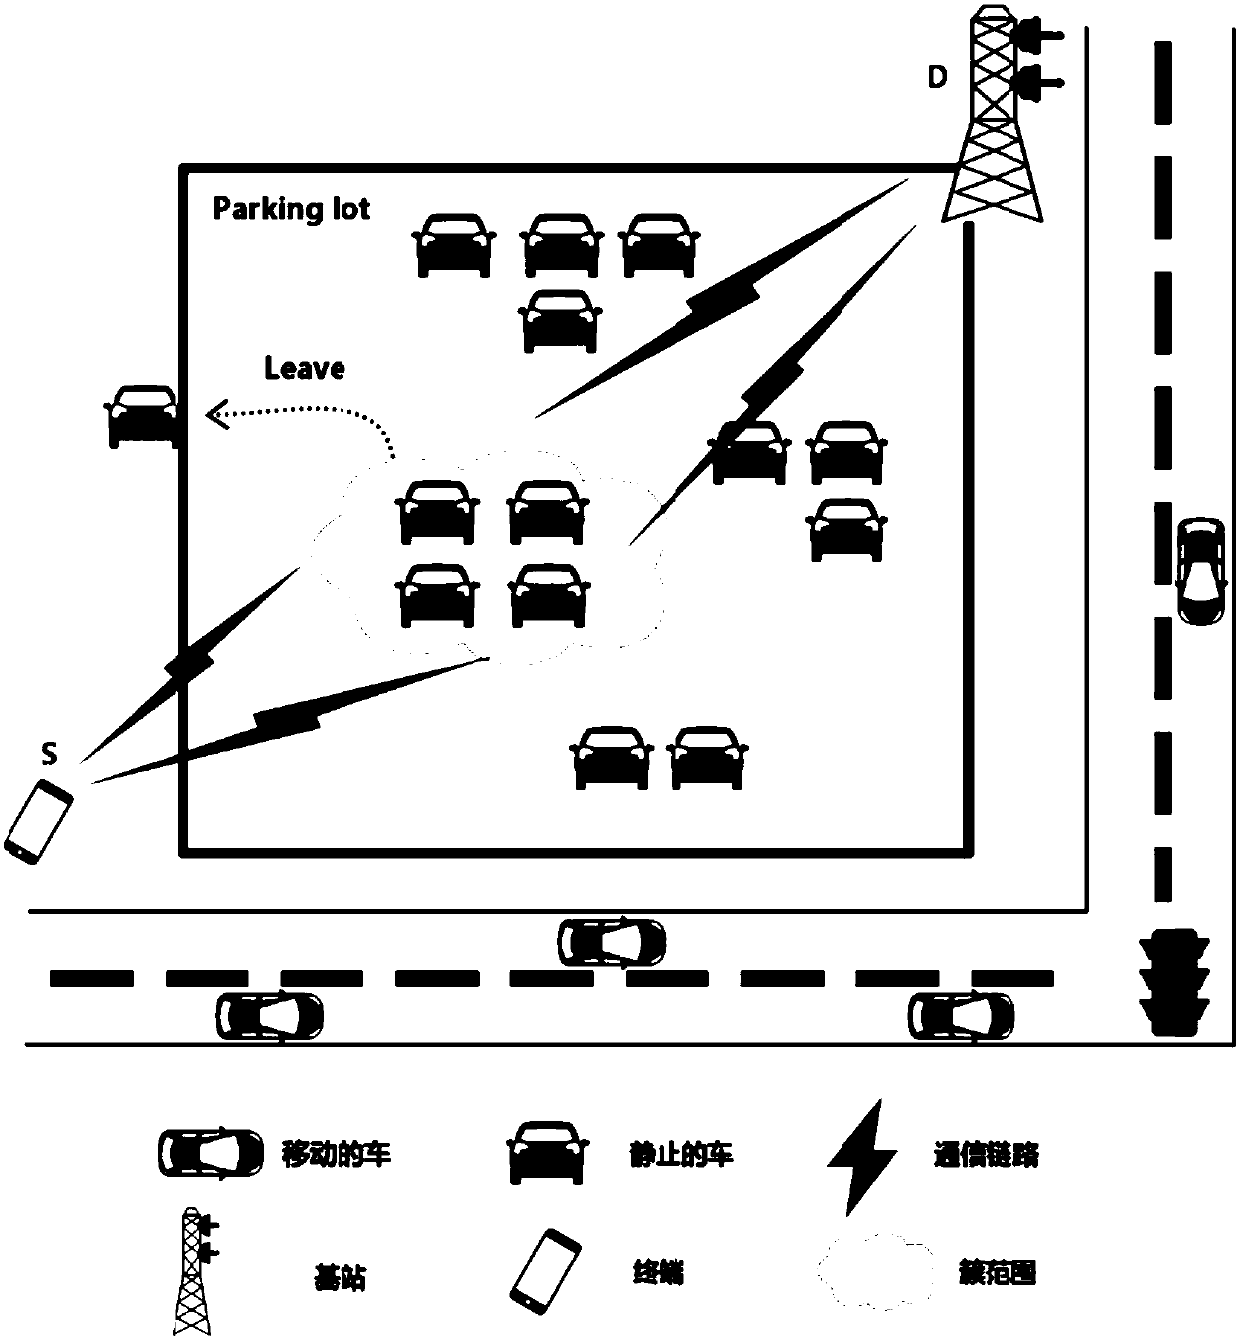 Multi-relay cooperation system based on vehicle assistance in parking lot and communication method